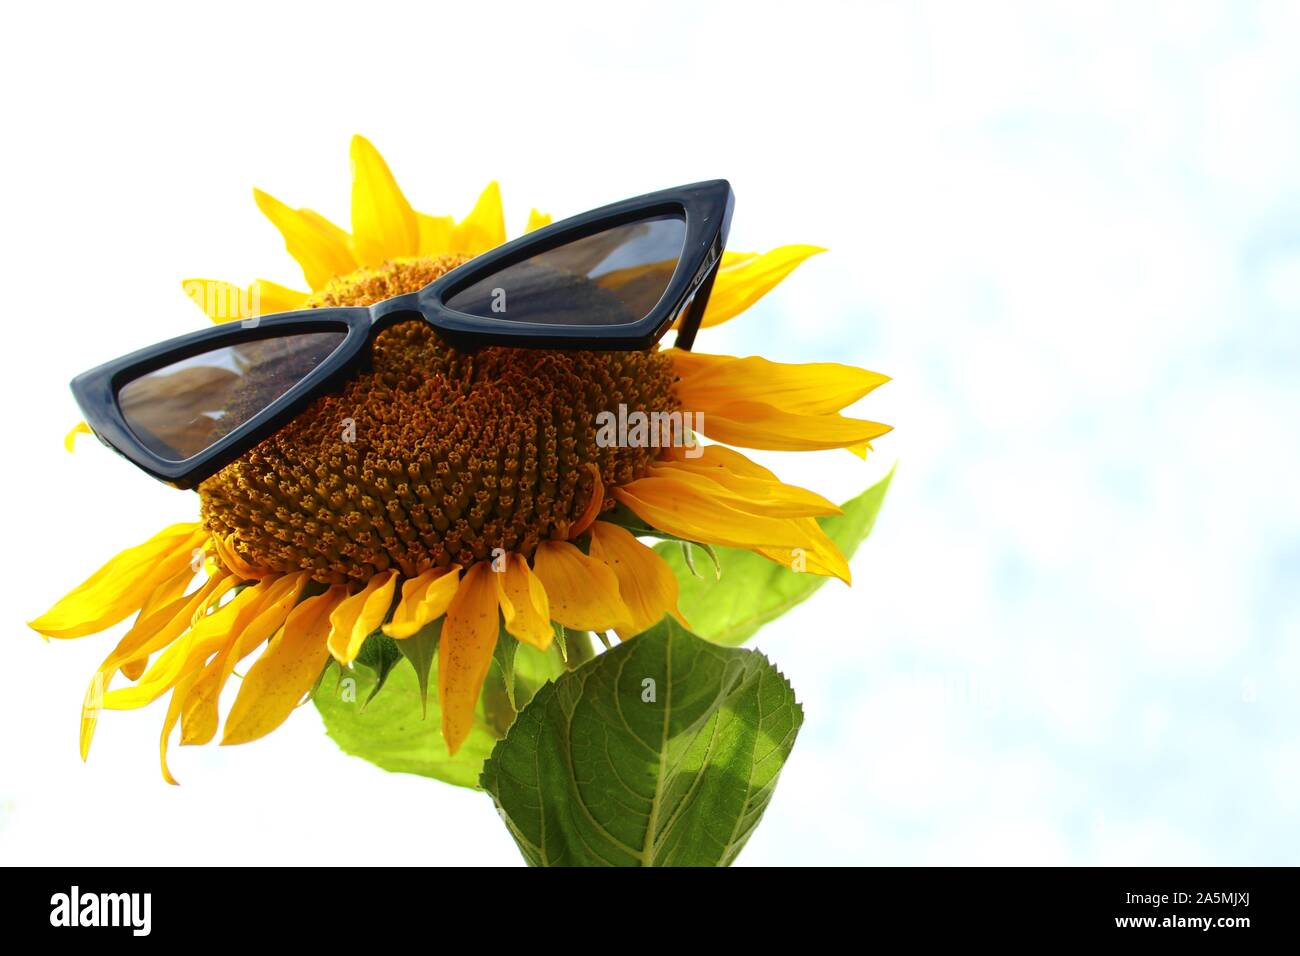 The picture shows sunflower with sunglasses. Stock Photo